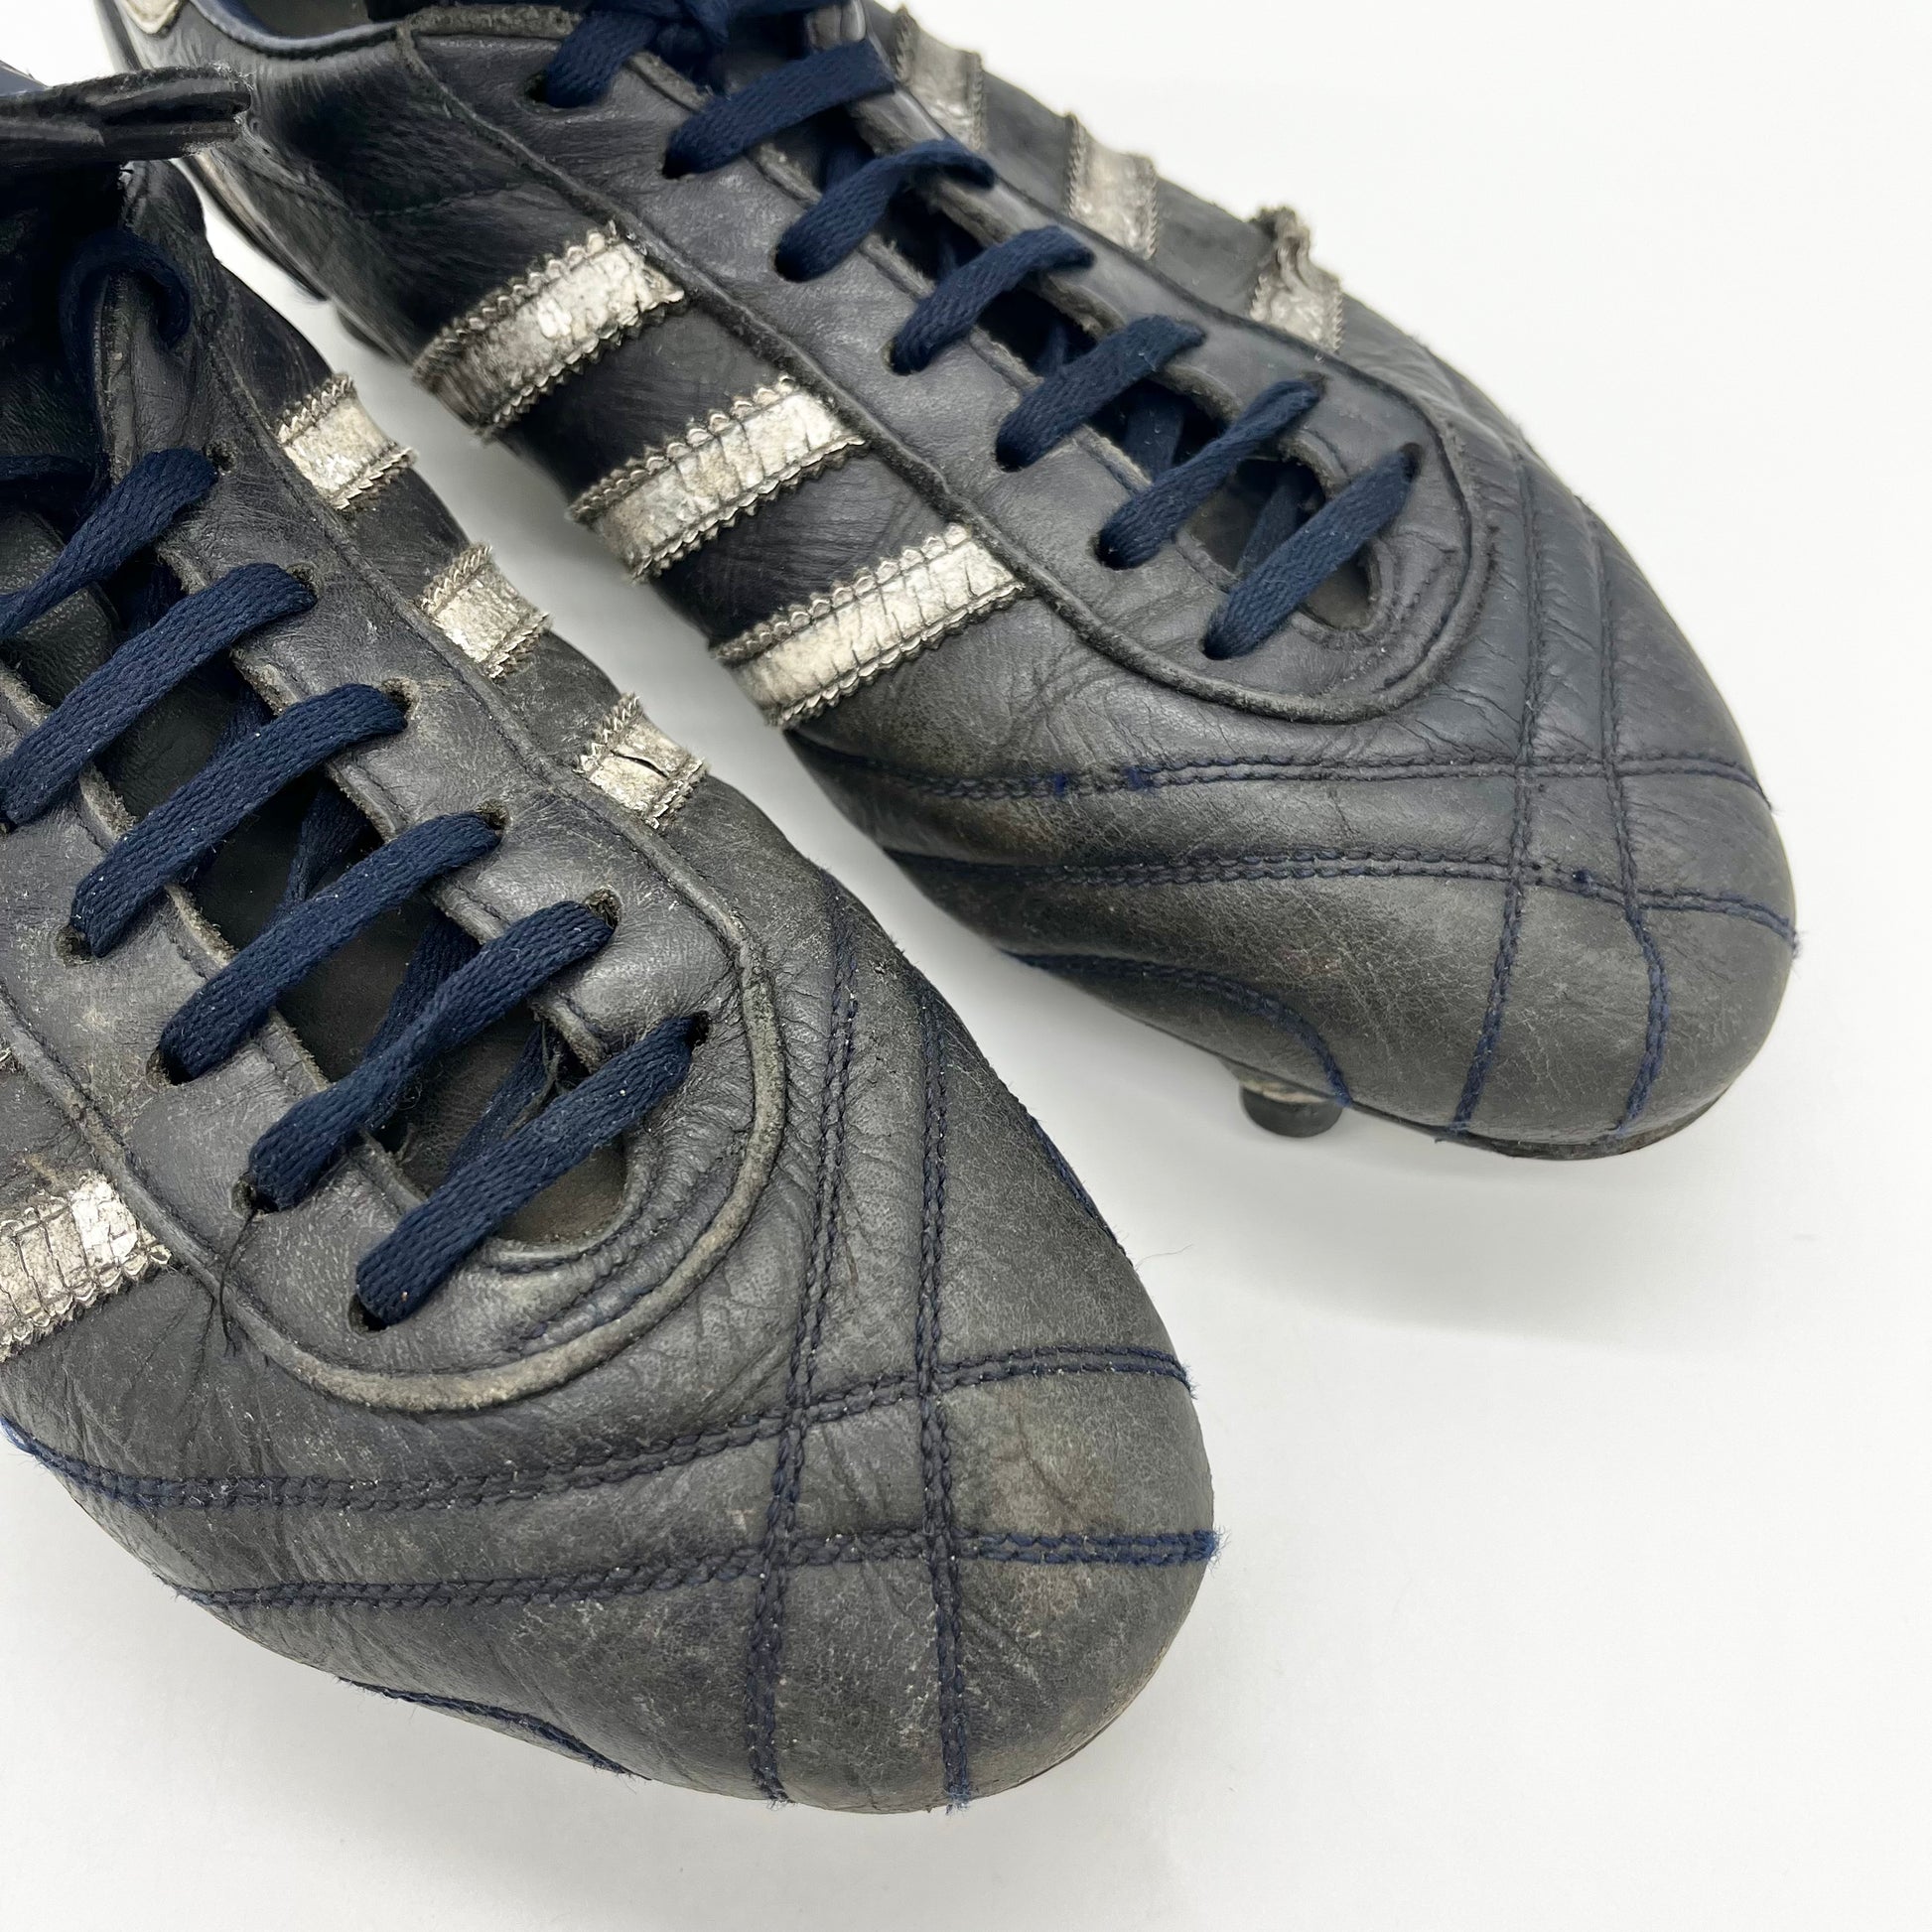 Manchester United's 1985 FA Cup success marked by adidas Originals  collection